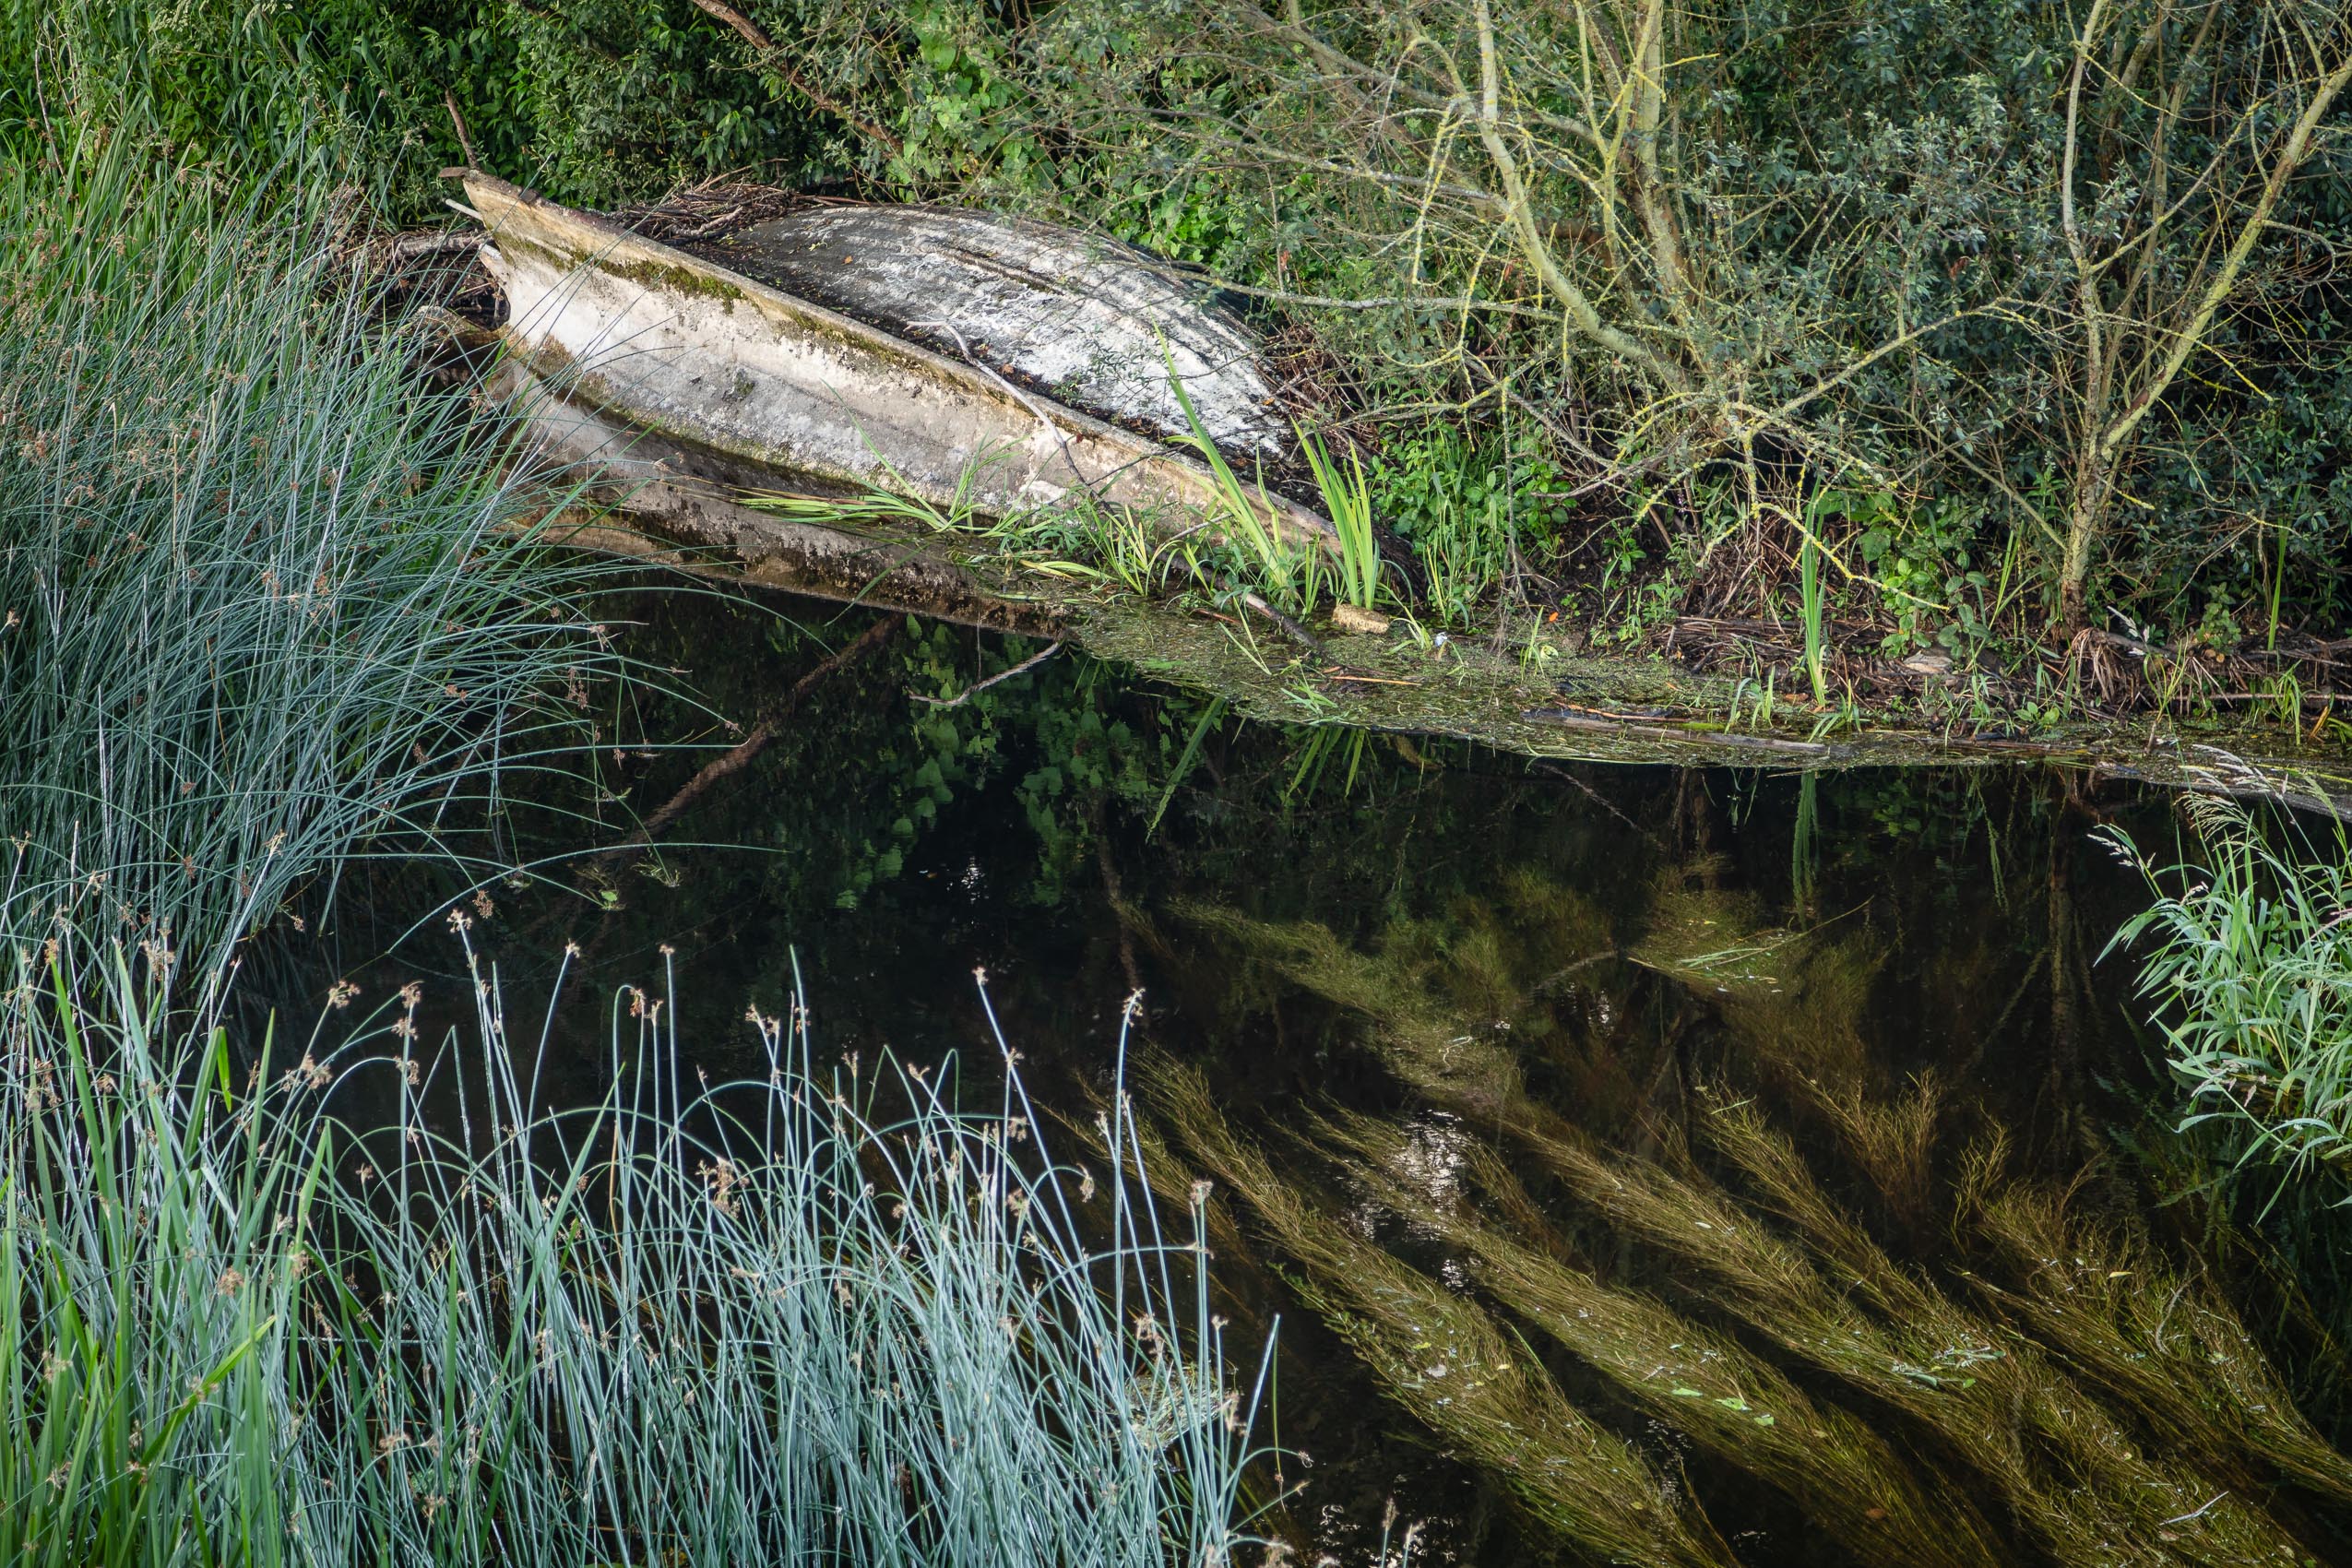 Abandoned boat on overgrown bank of the River Barrow at Graiguenamanagh, County Kilkenny, Ireland. BR010